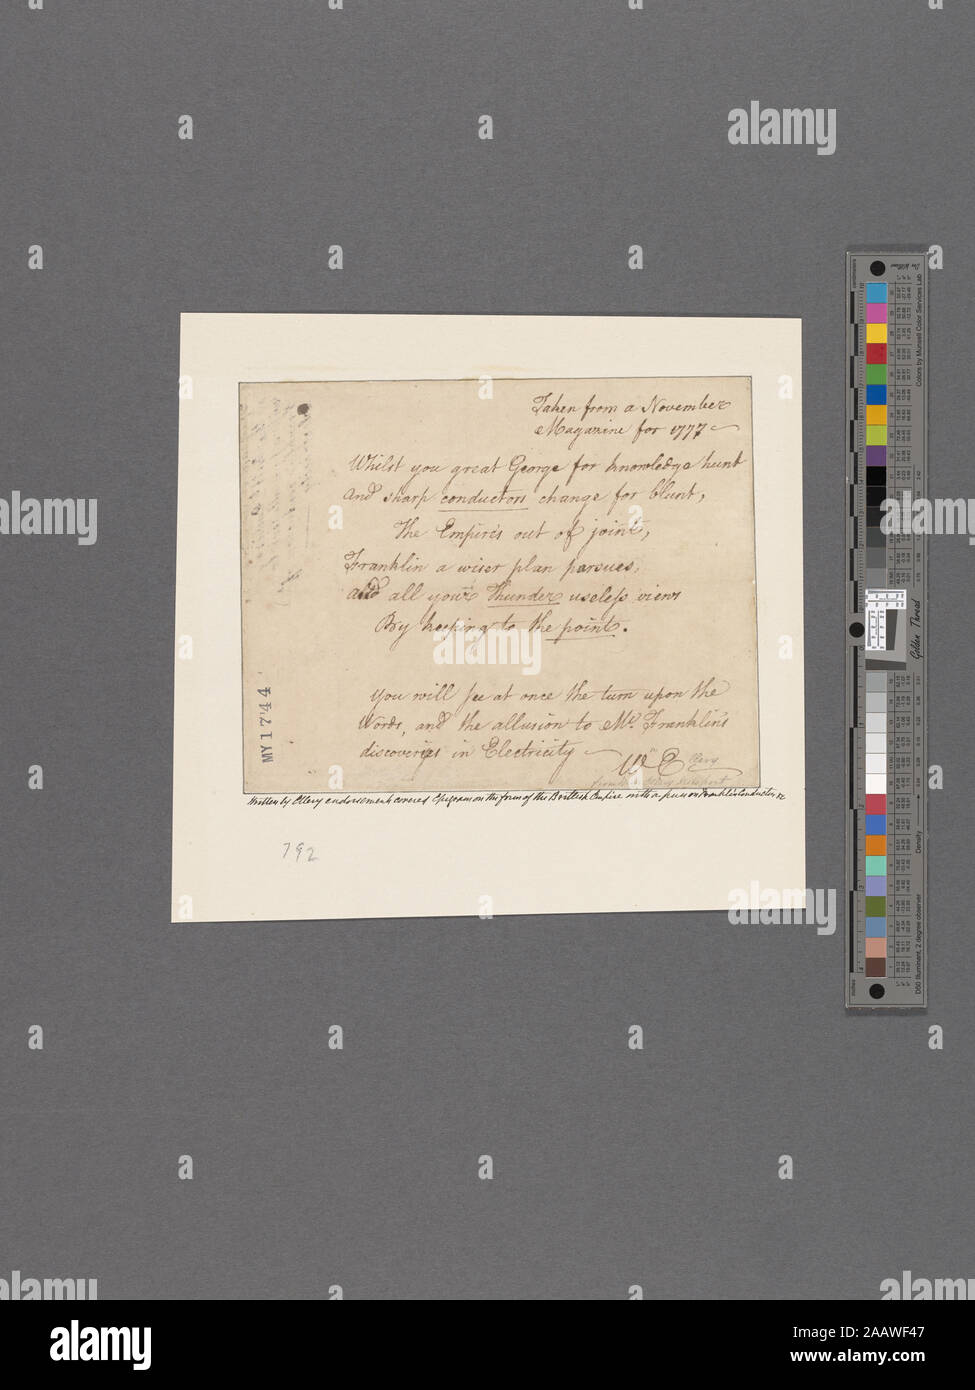 Ellery, William Copy of a poem Digitization was made possible by a lead gift from The Polonsky Foundation.; Ellery, William. Copy of a poem Stock Photo